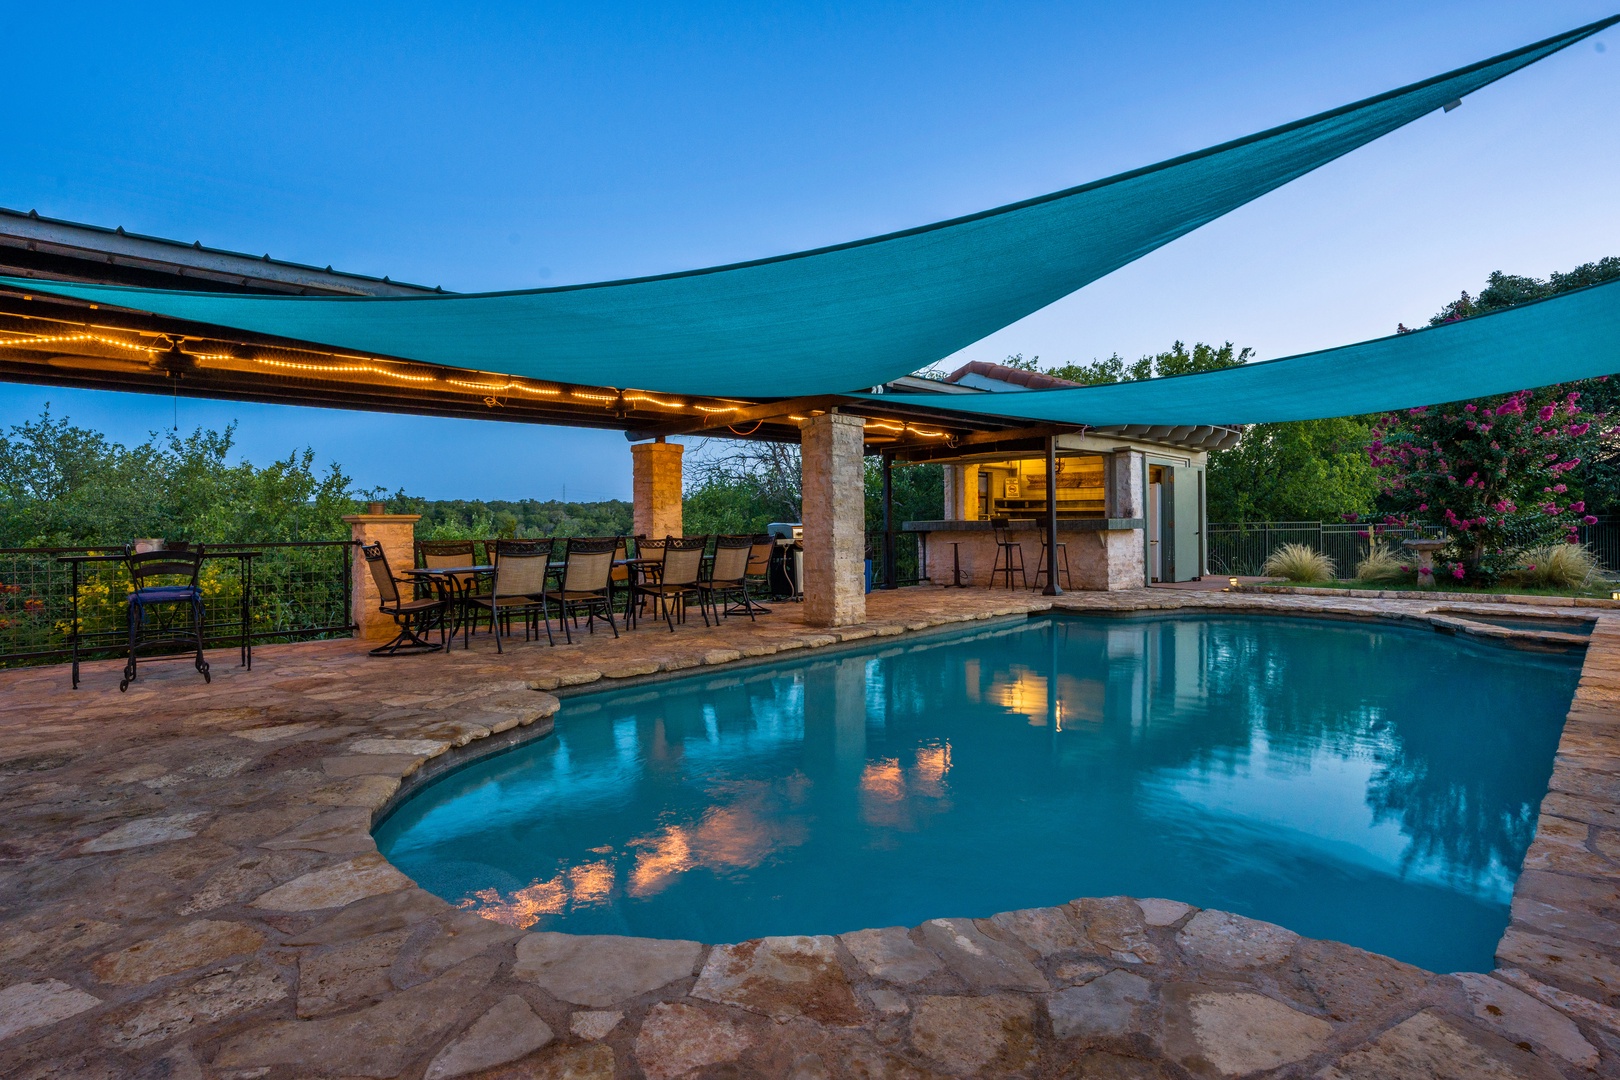 Private pool with outdoor dining and ample seating